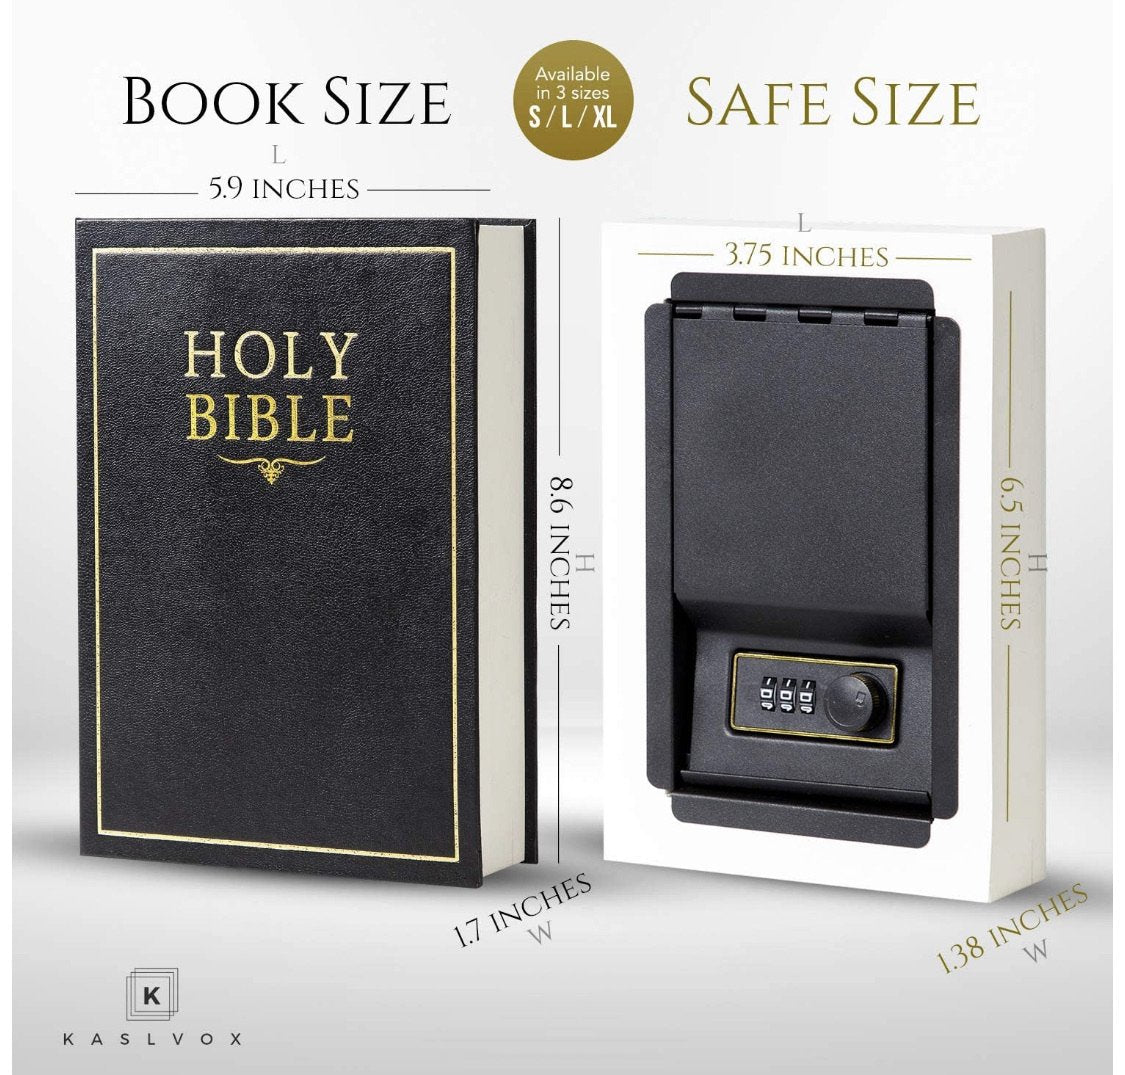 Diversion Book Safe with Combination Lock - Hollowed Out Book with Hidden Secret Compartment - Concealment Cans